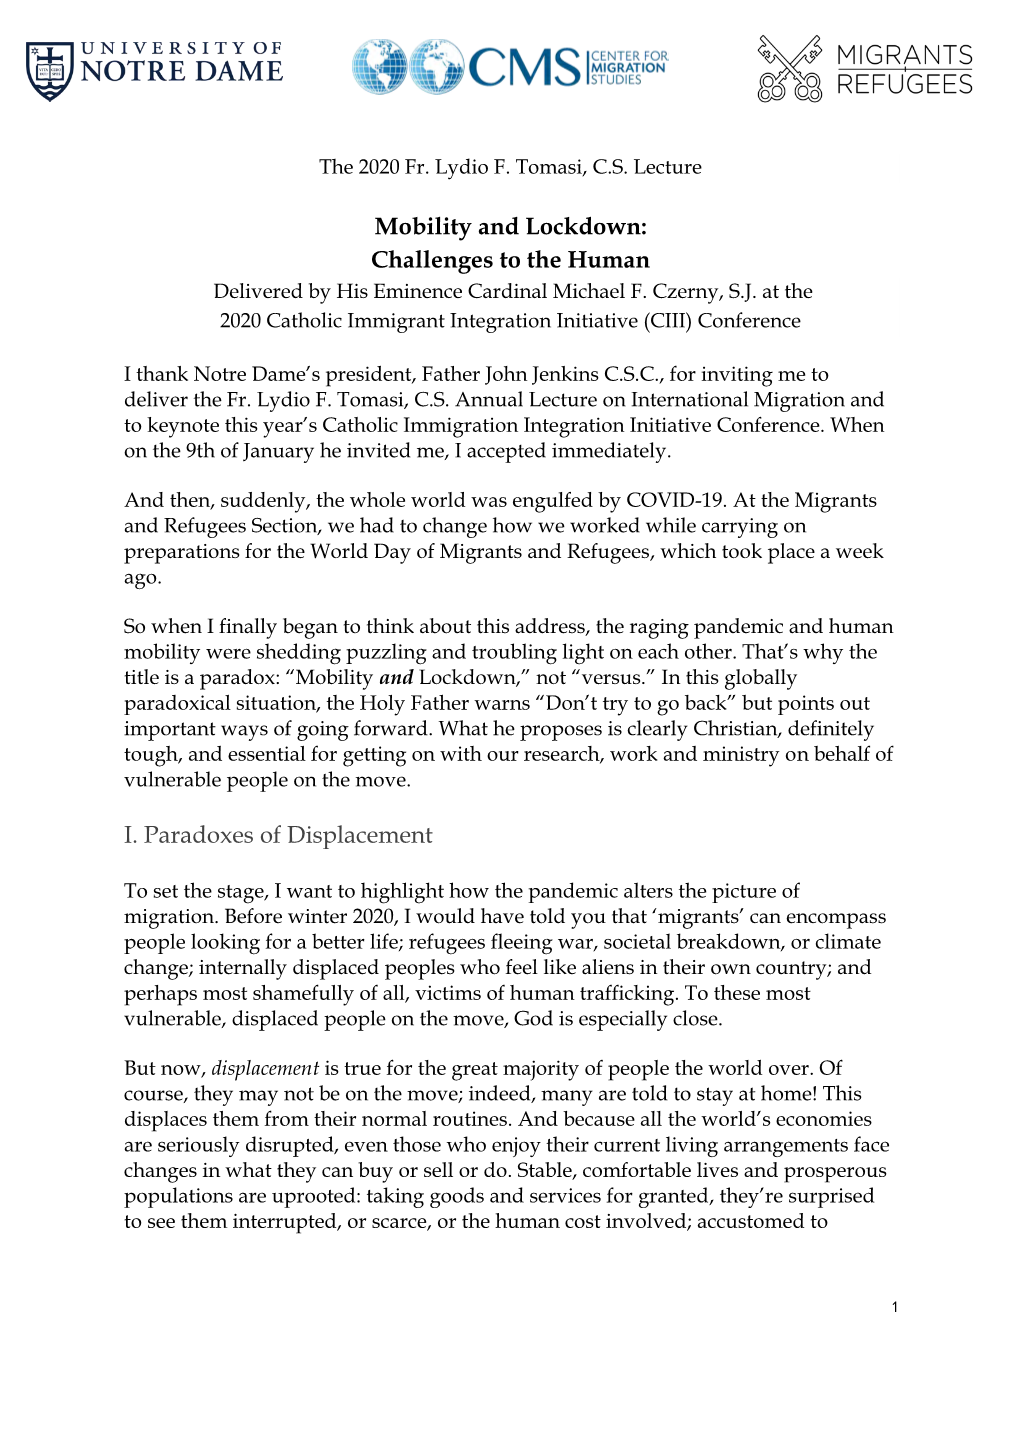 Challenges to the Human I. Paradoxes of Displacement